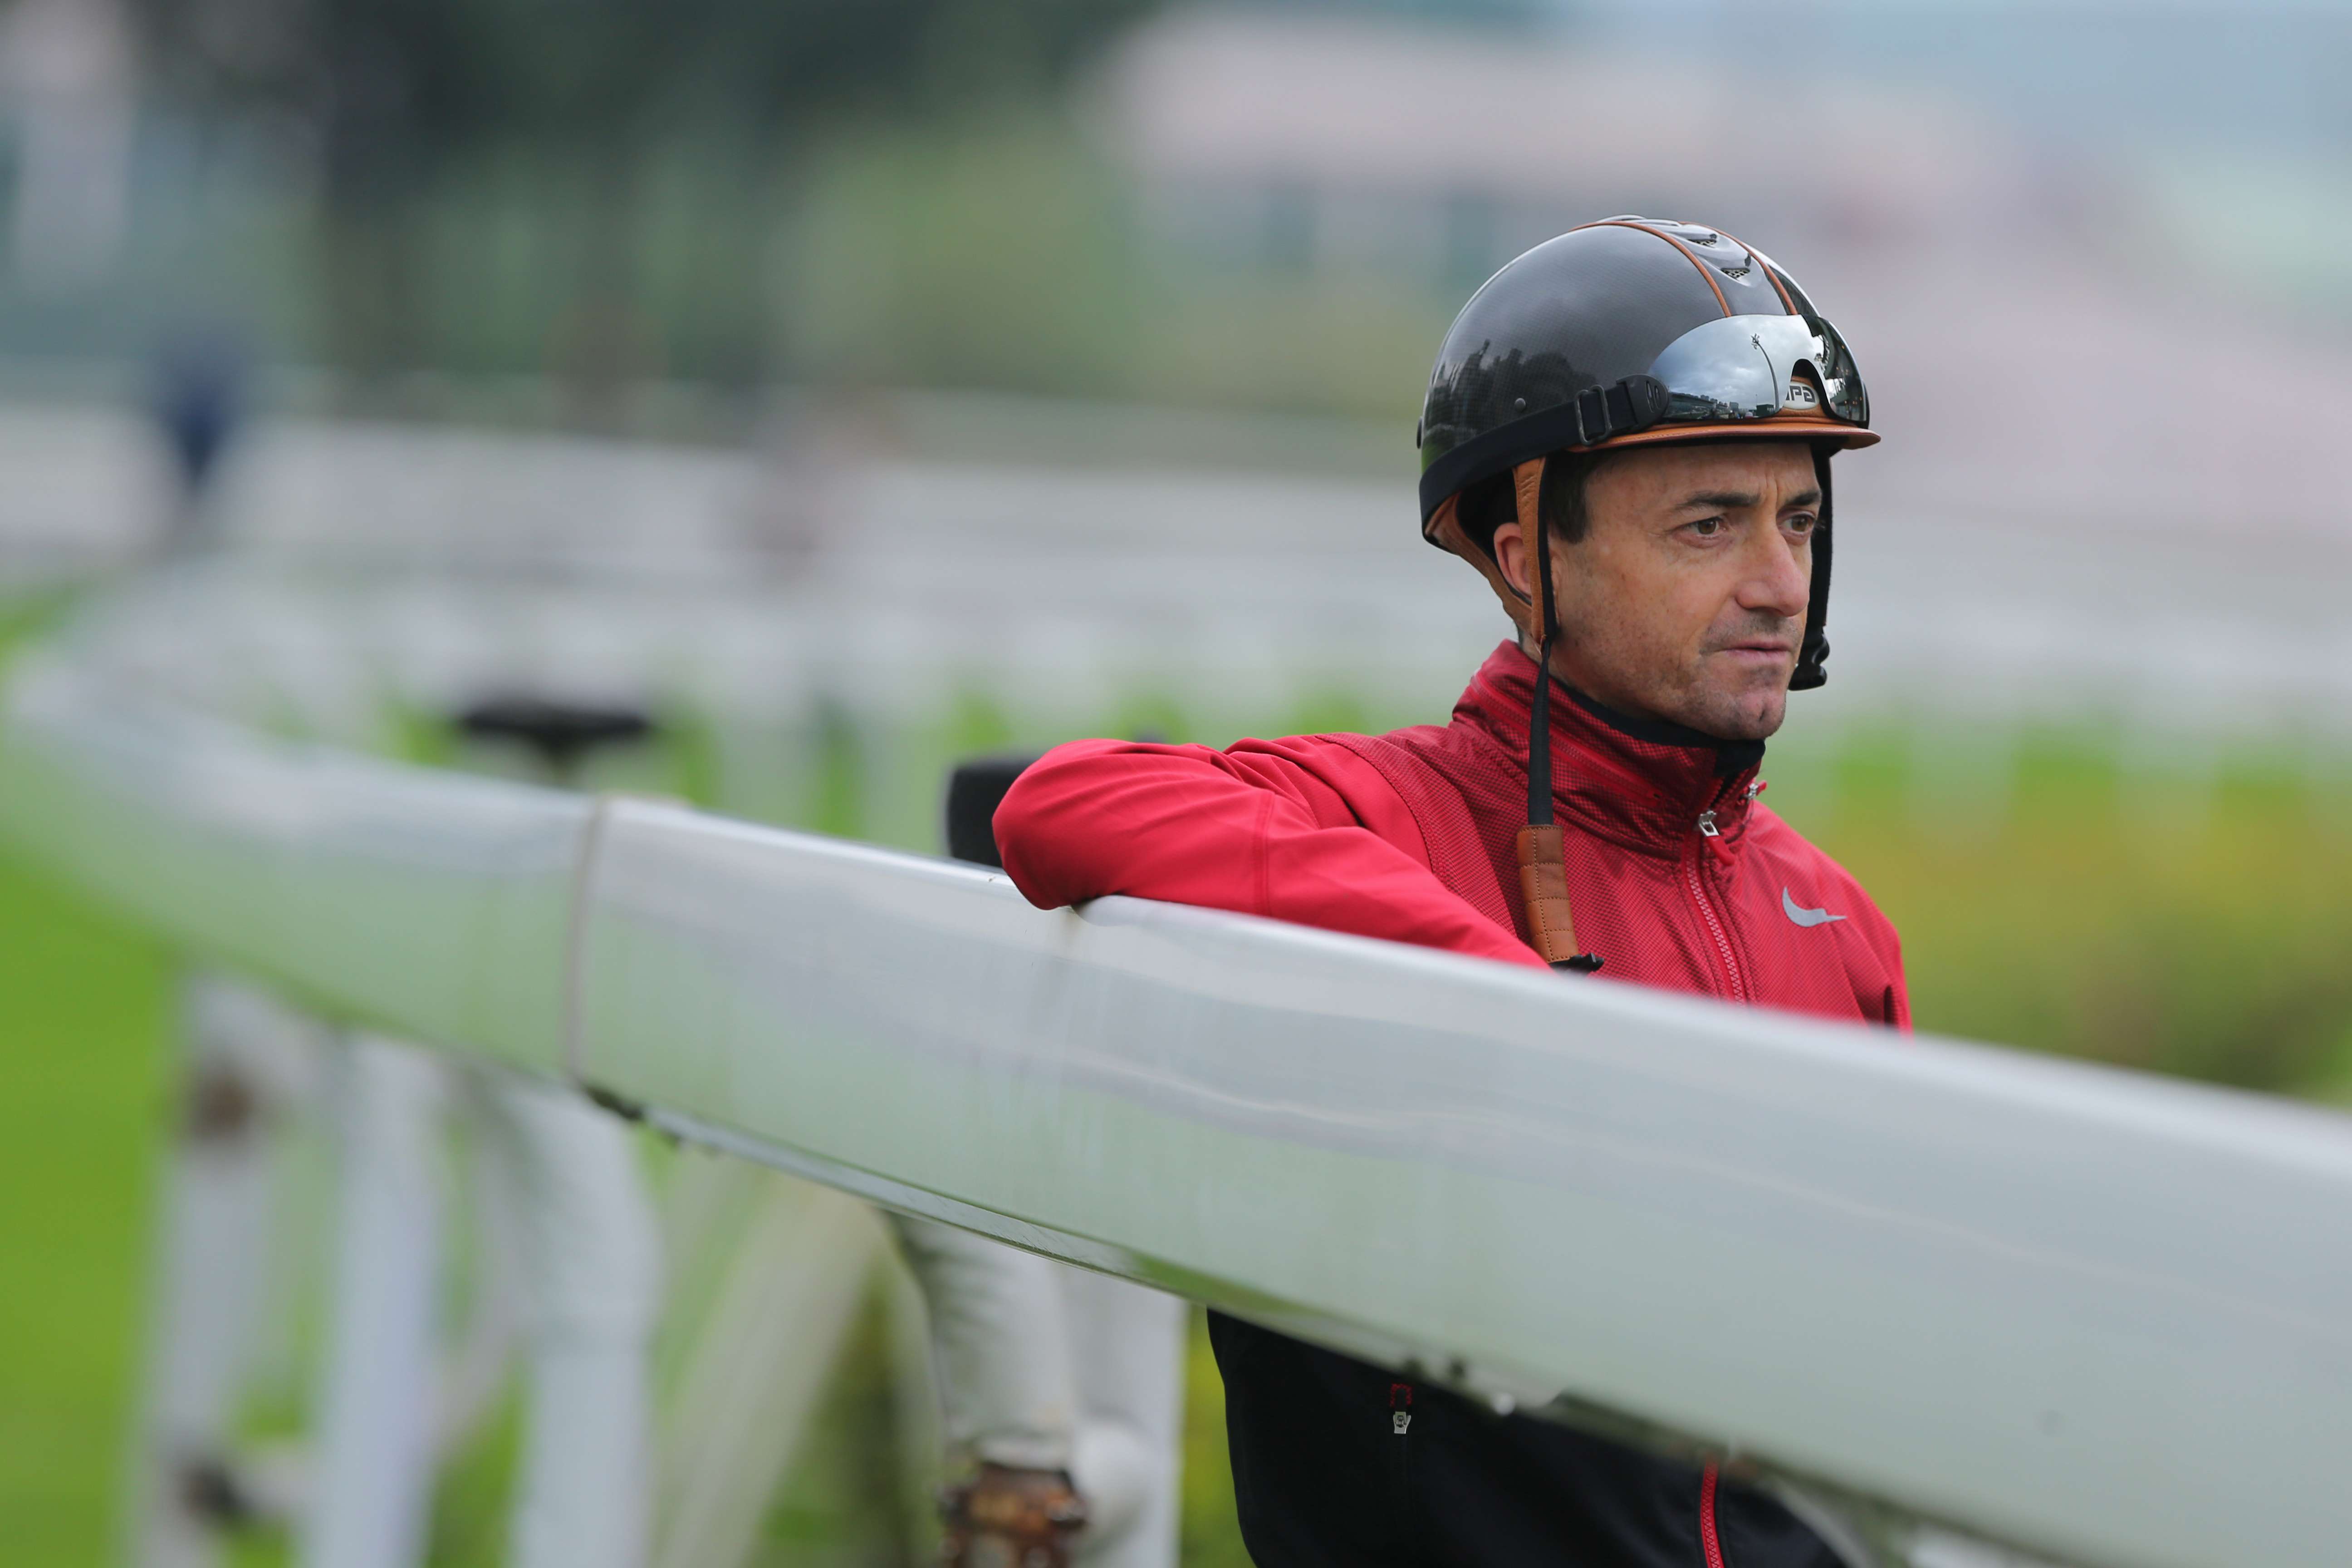 The 13-time Hong Kong champion, who rides Black Arthur, joins a number of riders who have made their names in Asia in the South African feature